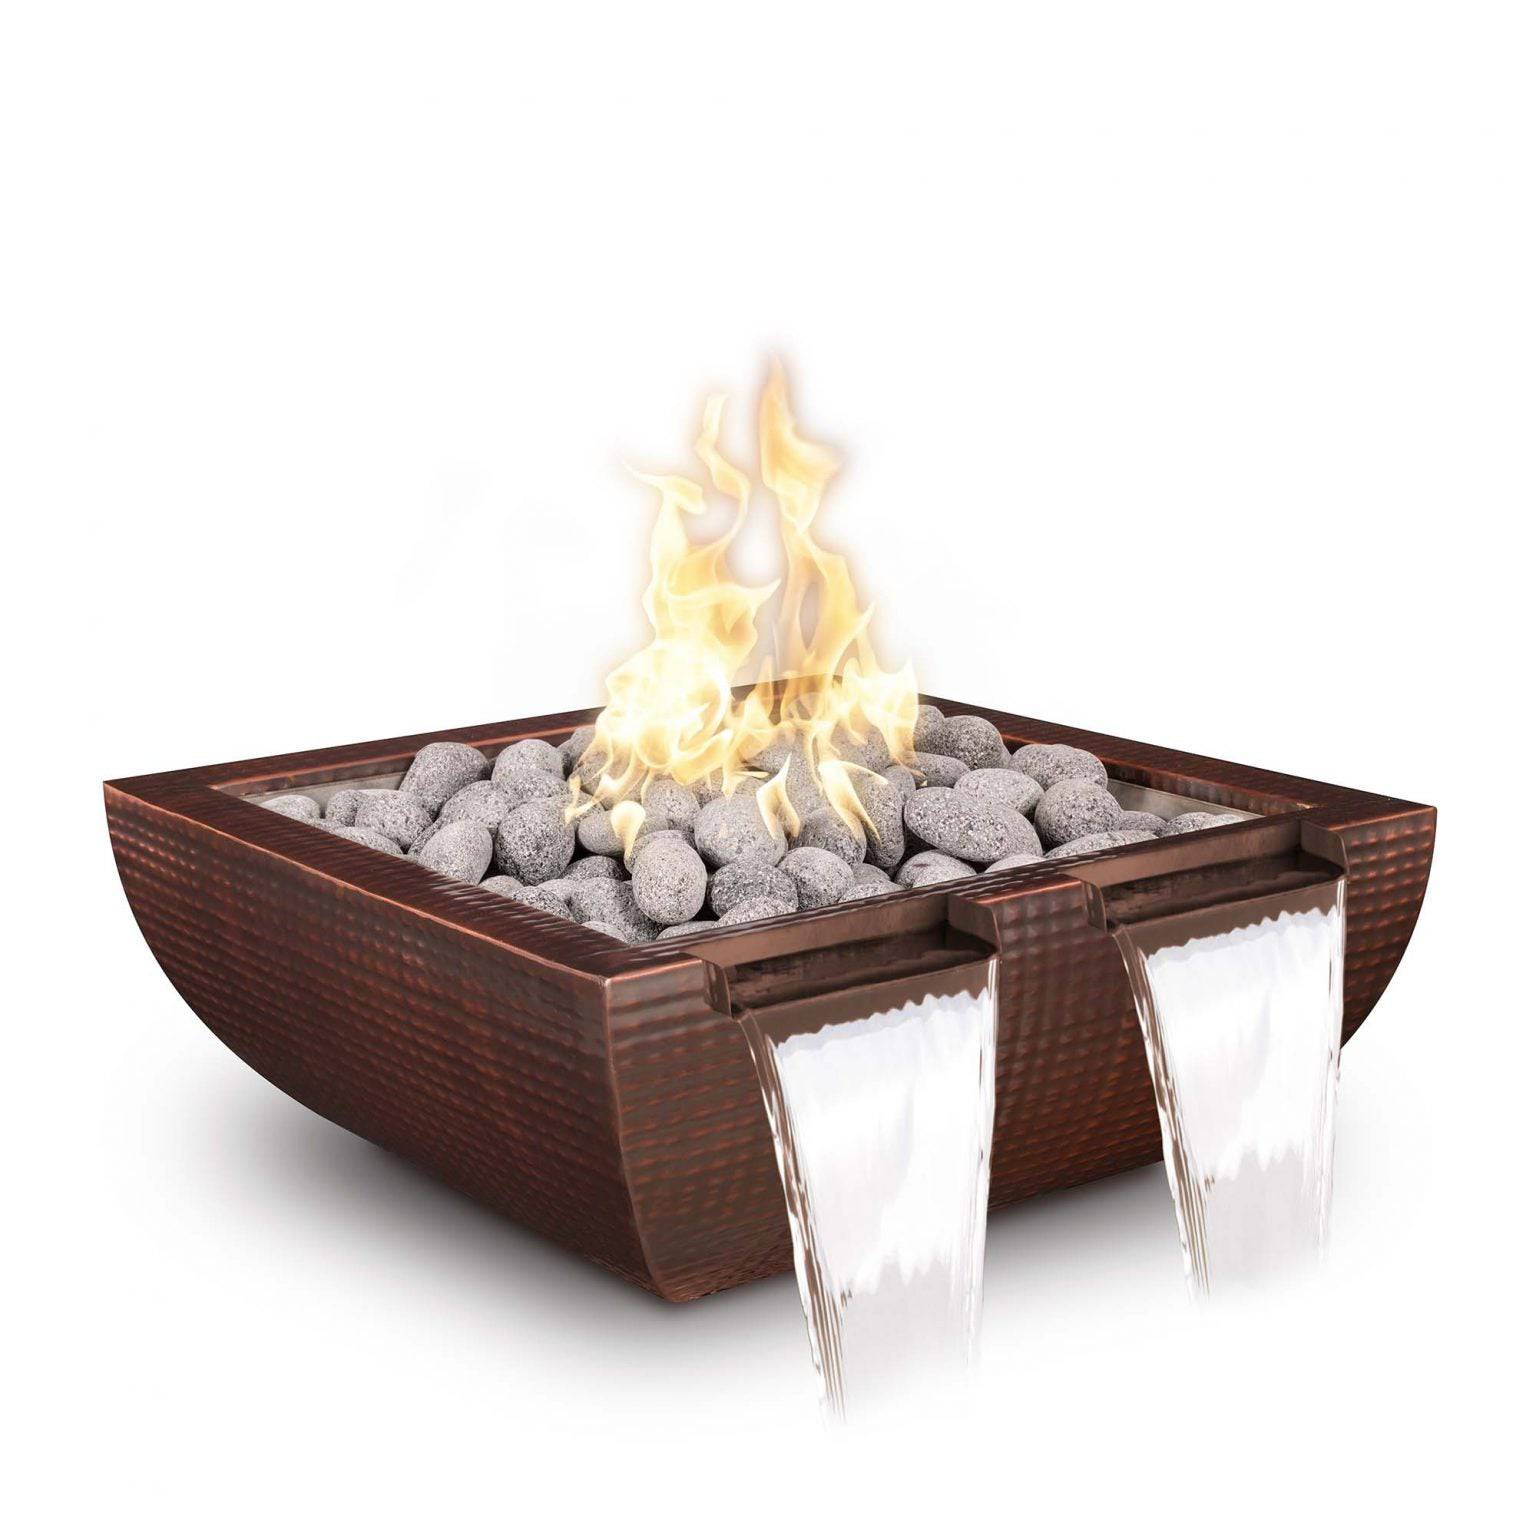 The Outdoor Plus Avalon Fire & Water Bowl Twin Spill Hammered Copper OPT-XXAVCPFWTS - Serenity Provision